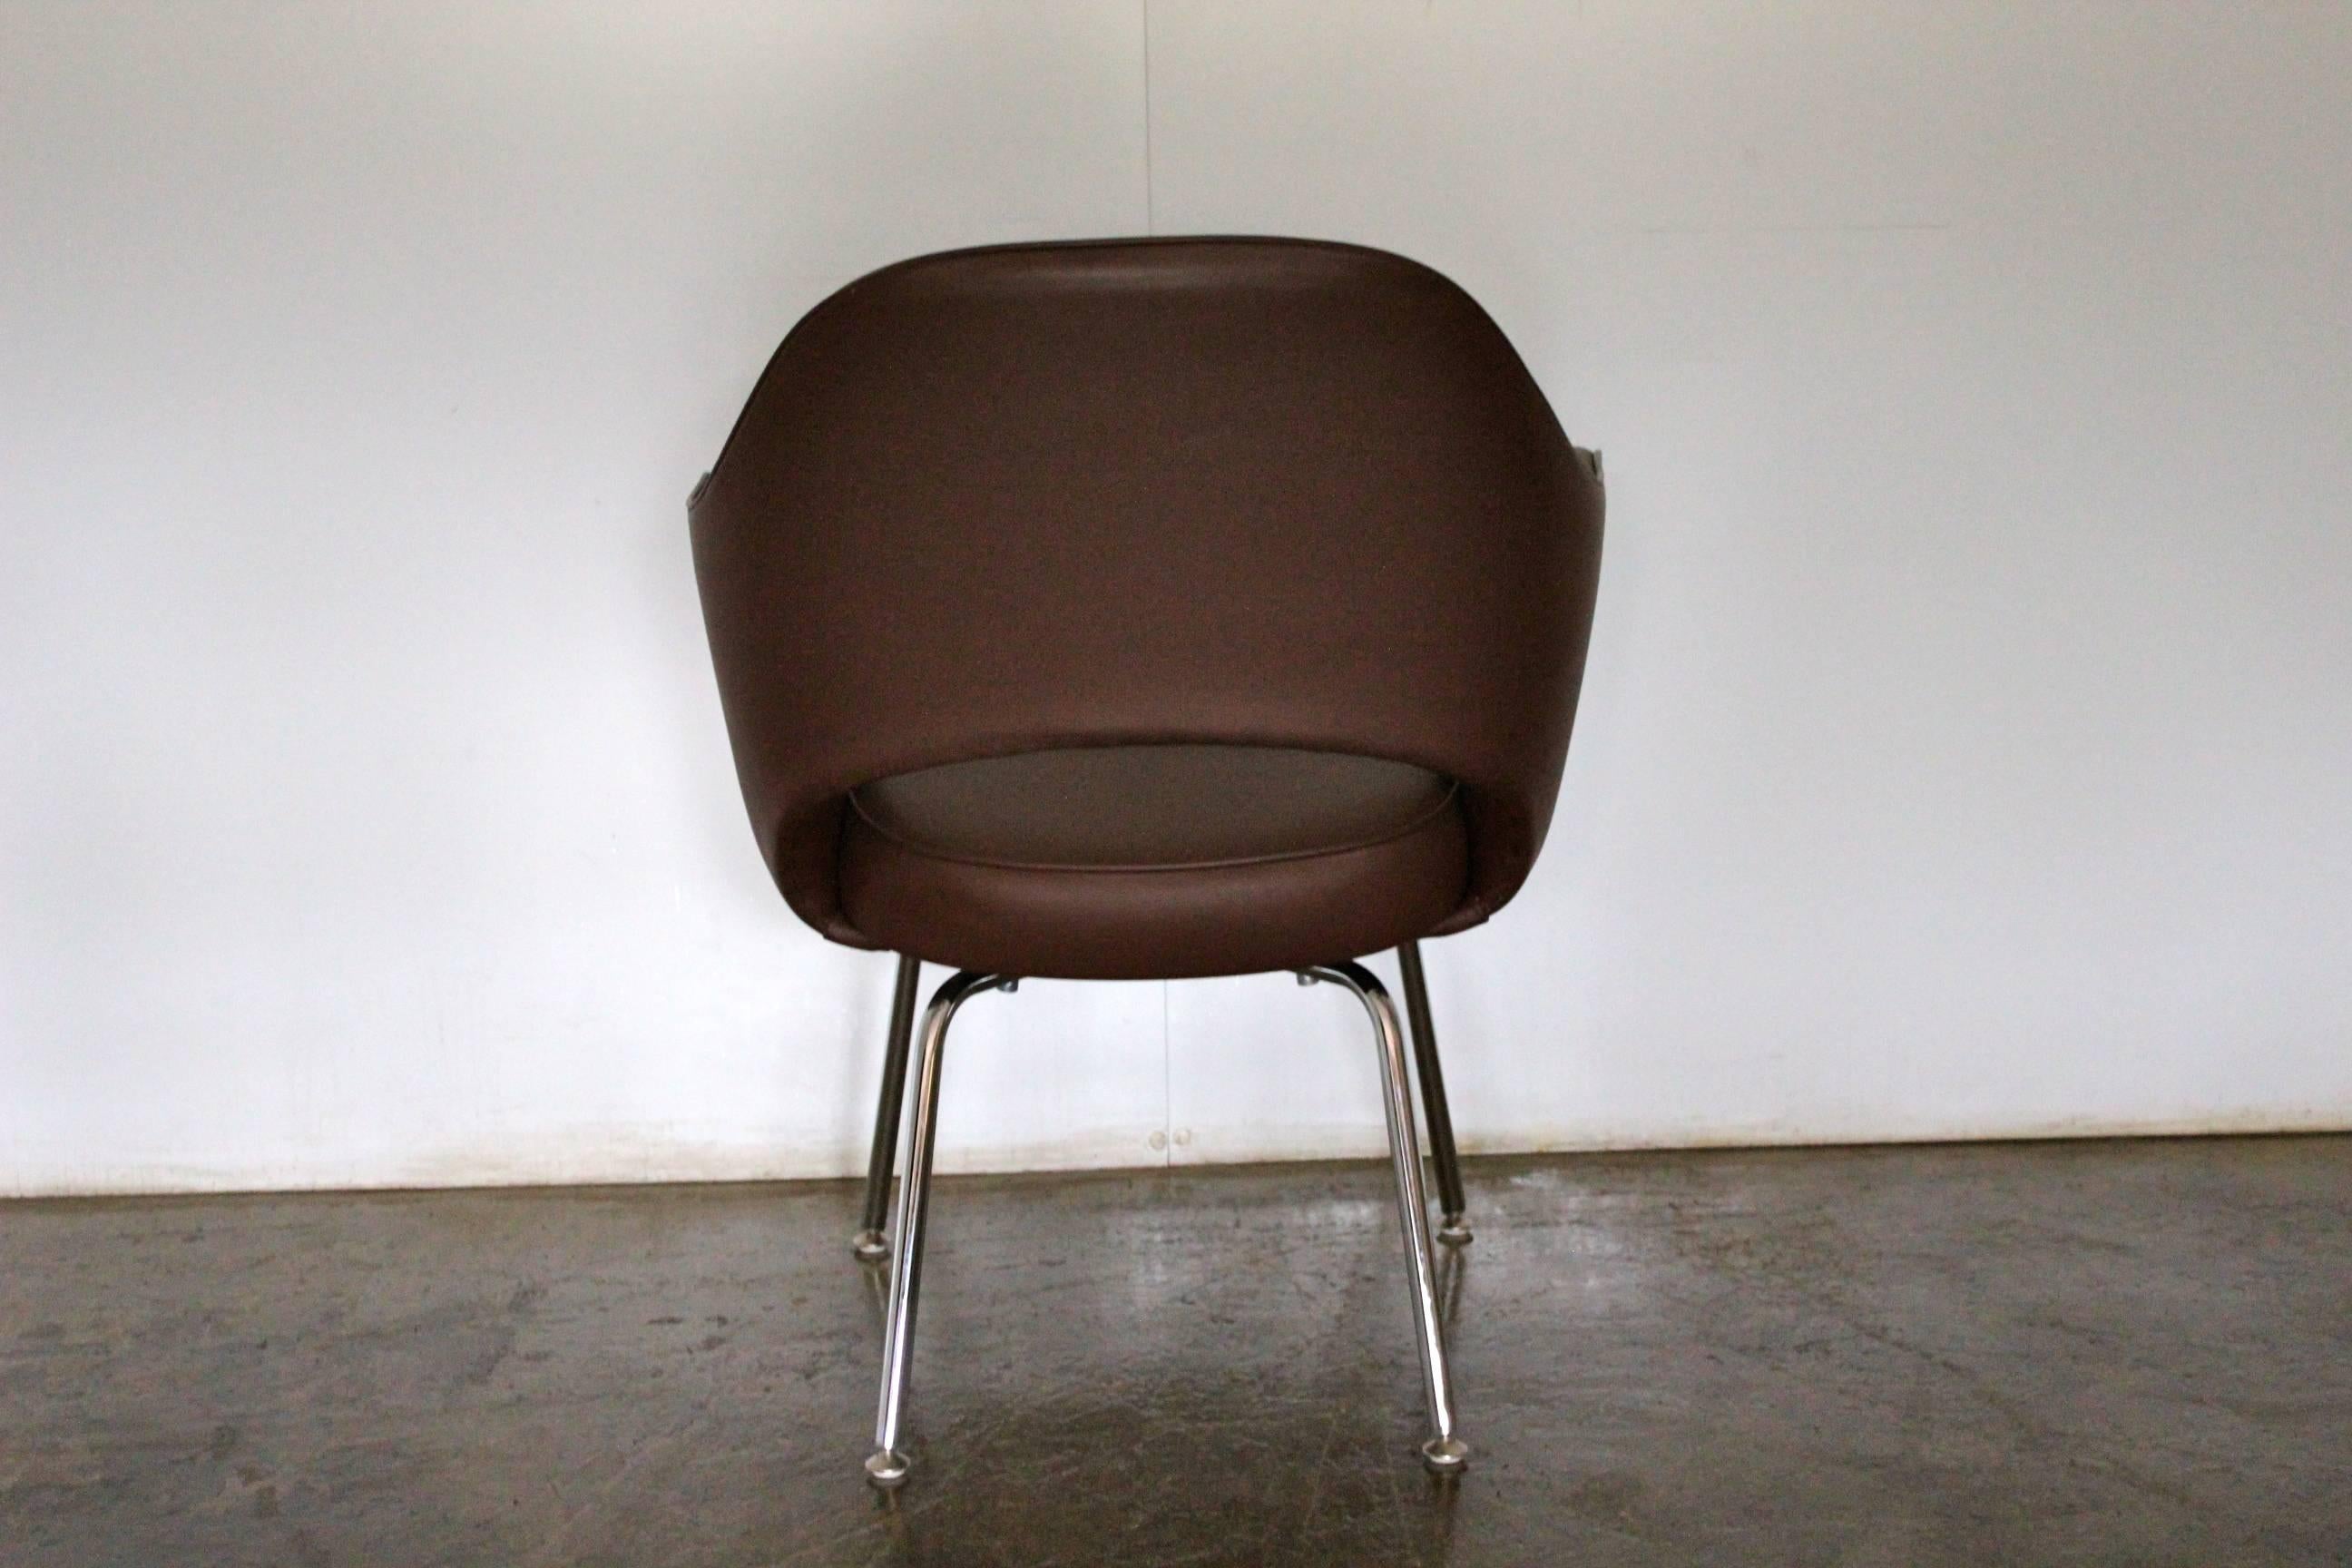 On offer on this occasion is a rare, original “Saarinen Executive Armchair” armchair from the world renown furniture house of Knoll Studio, dressed in a sublime, tactile “American Gothic” Volo mid-brown leather, and with polished “Chrome Tubular”